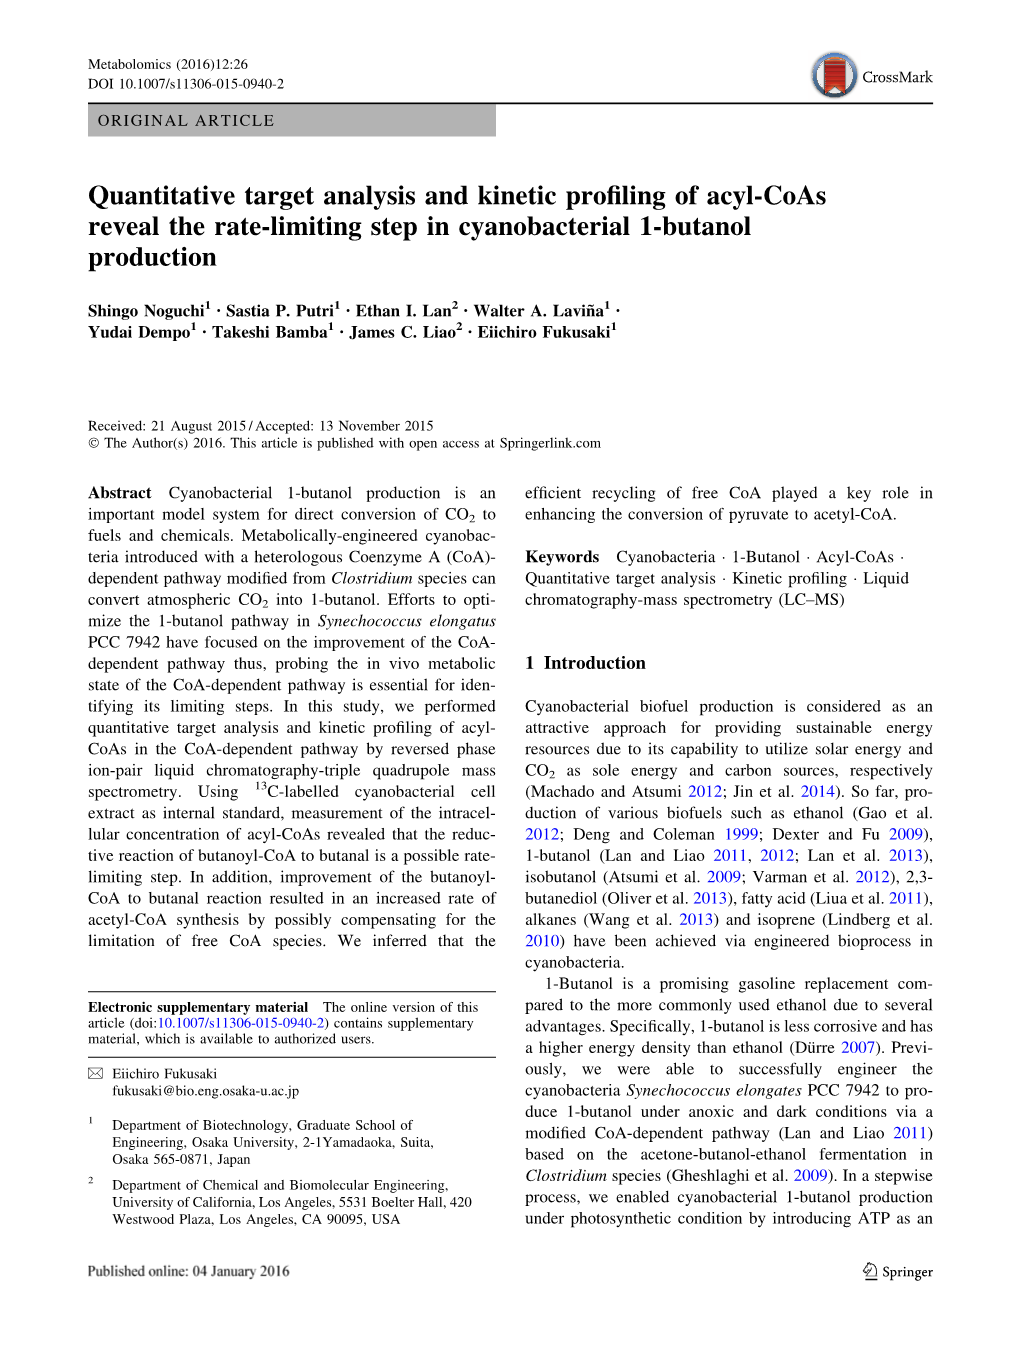 Quantitative Target Analysis and Kinetic Profiling of Acyl-Coas Reveal the Rate-Limiting Step in Cyanobacterial 1-Butanol Produc